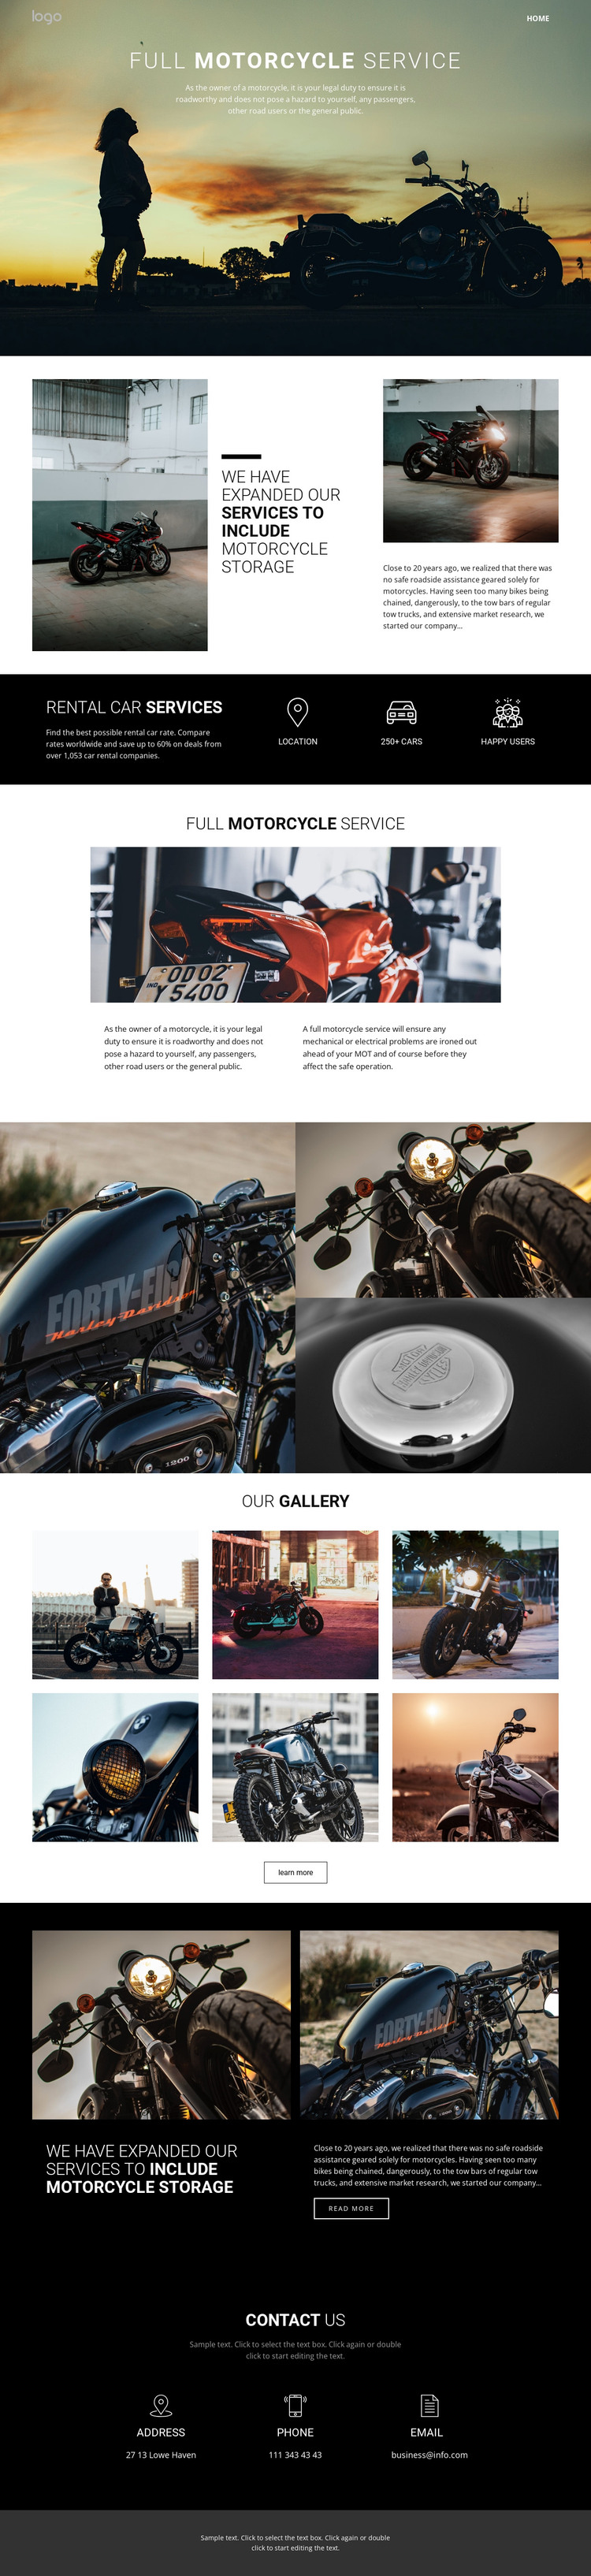 Caring for cycles and cars Web Design